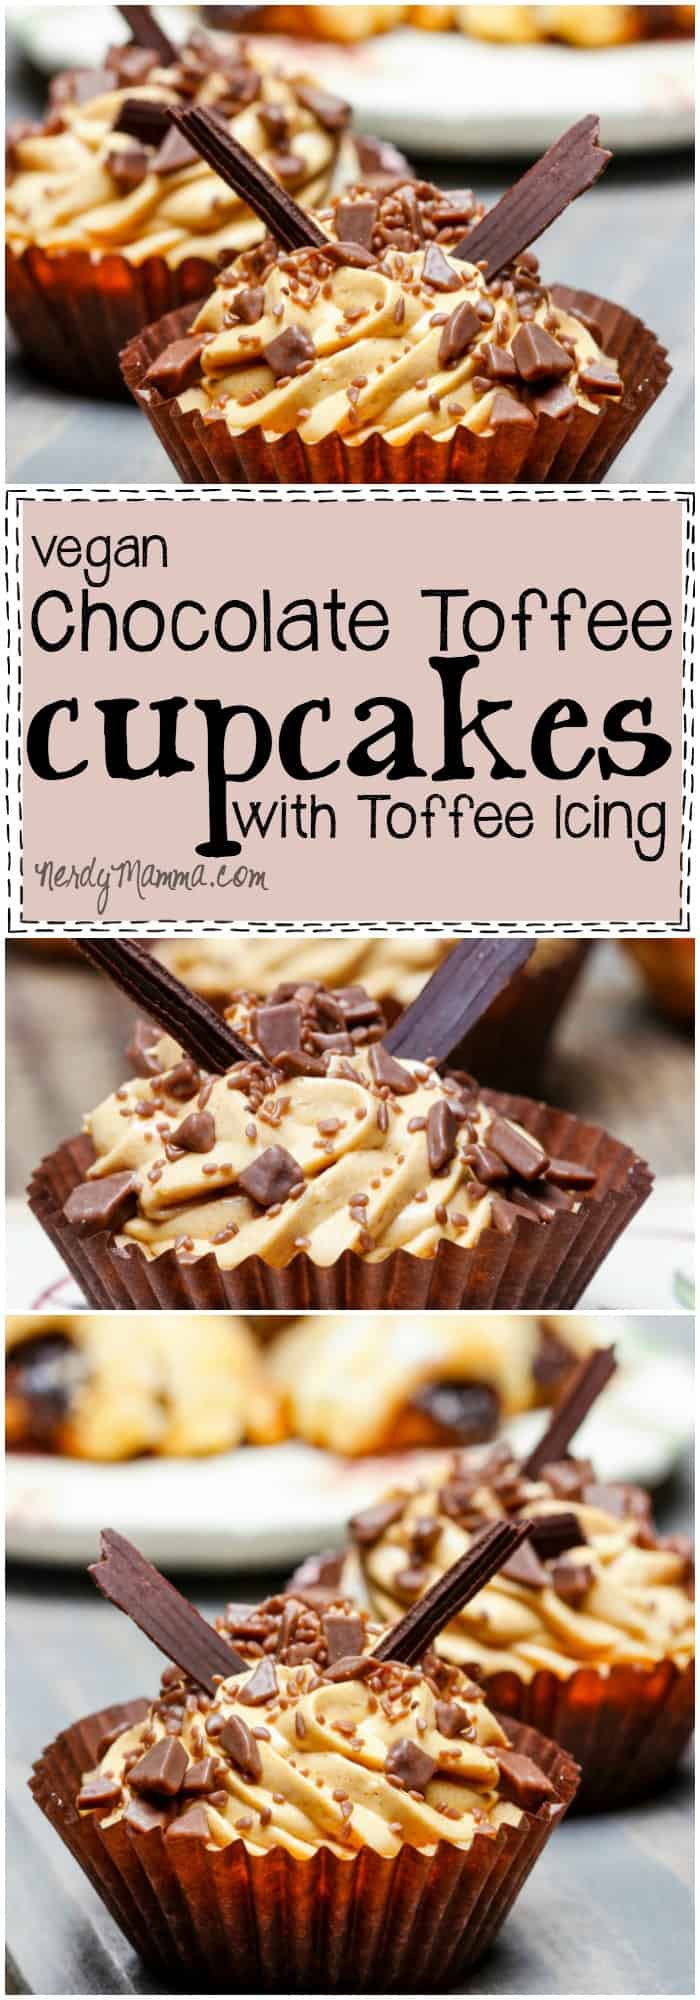 This recipe for Vegan Chocolate Toffee Cupcakes with Toffee Icing sounds so good. It's easy enough that anyone could make it...I love this idea!